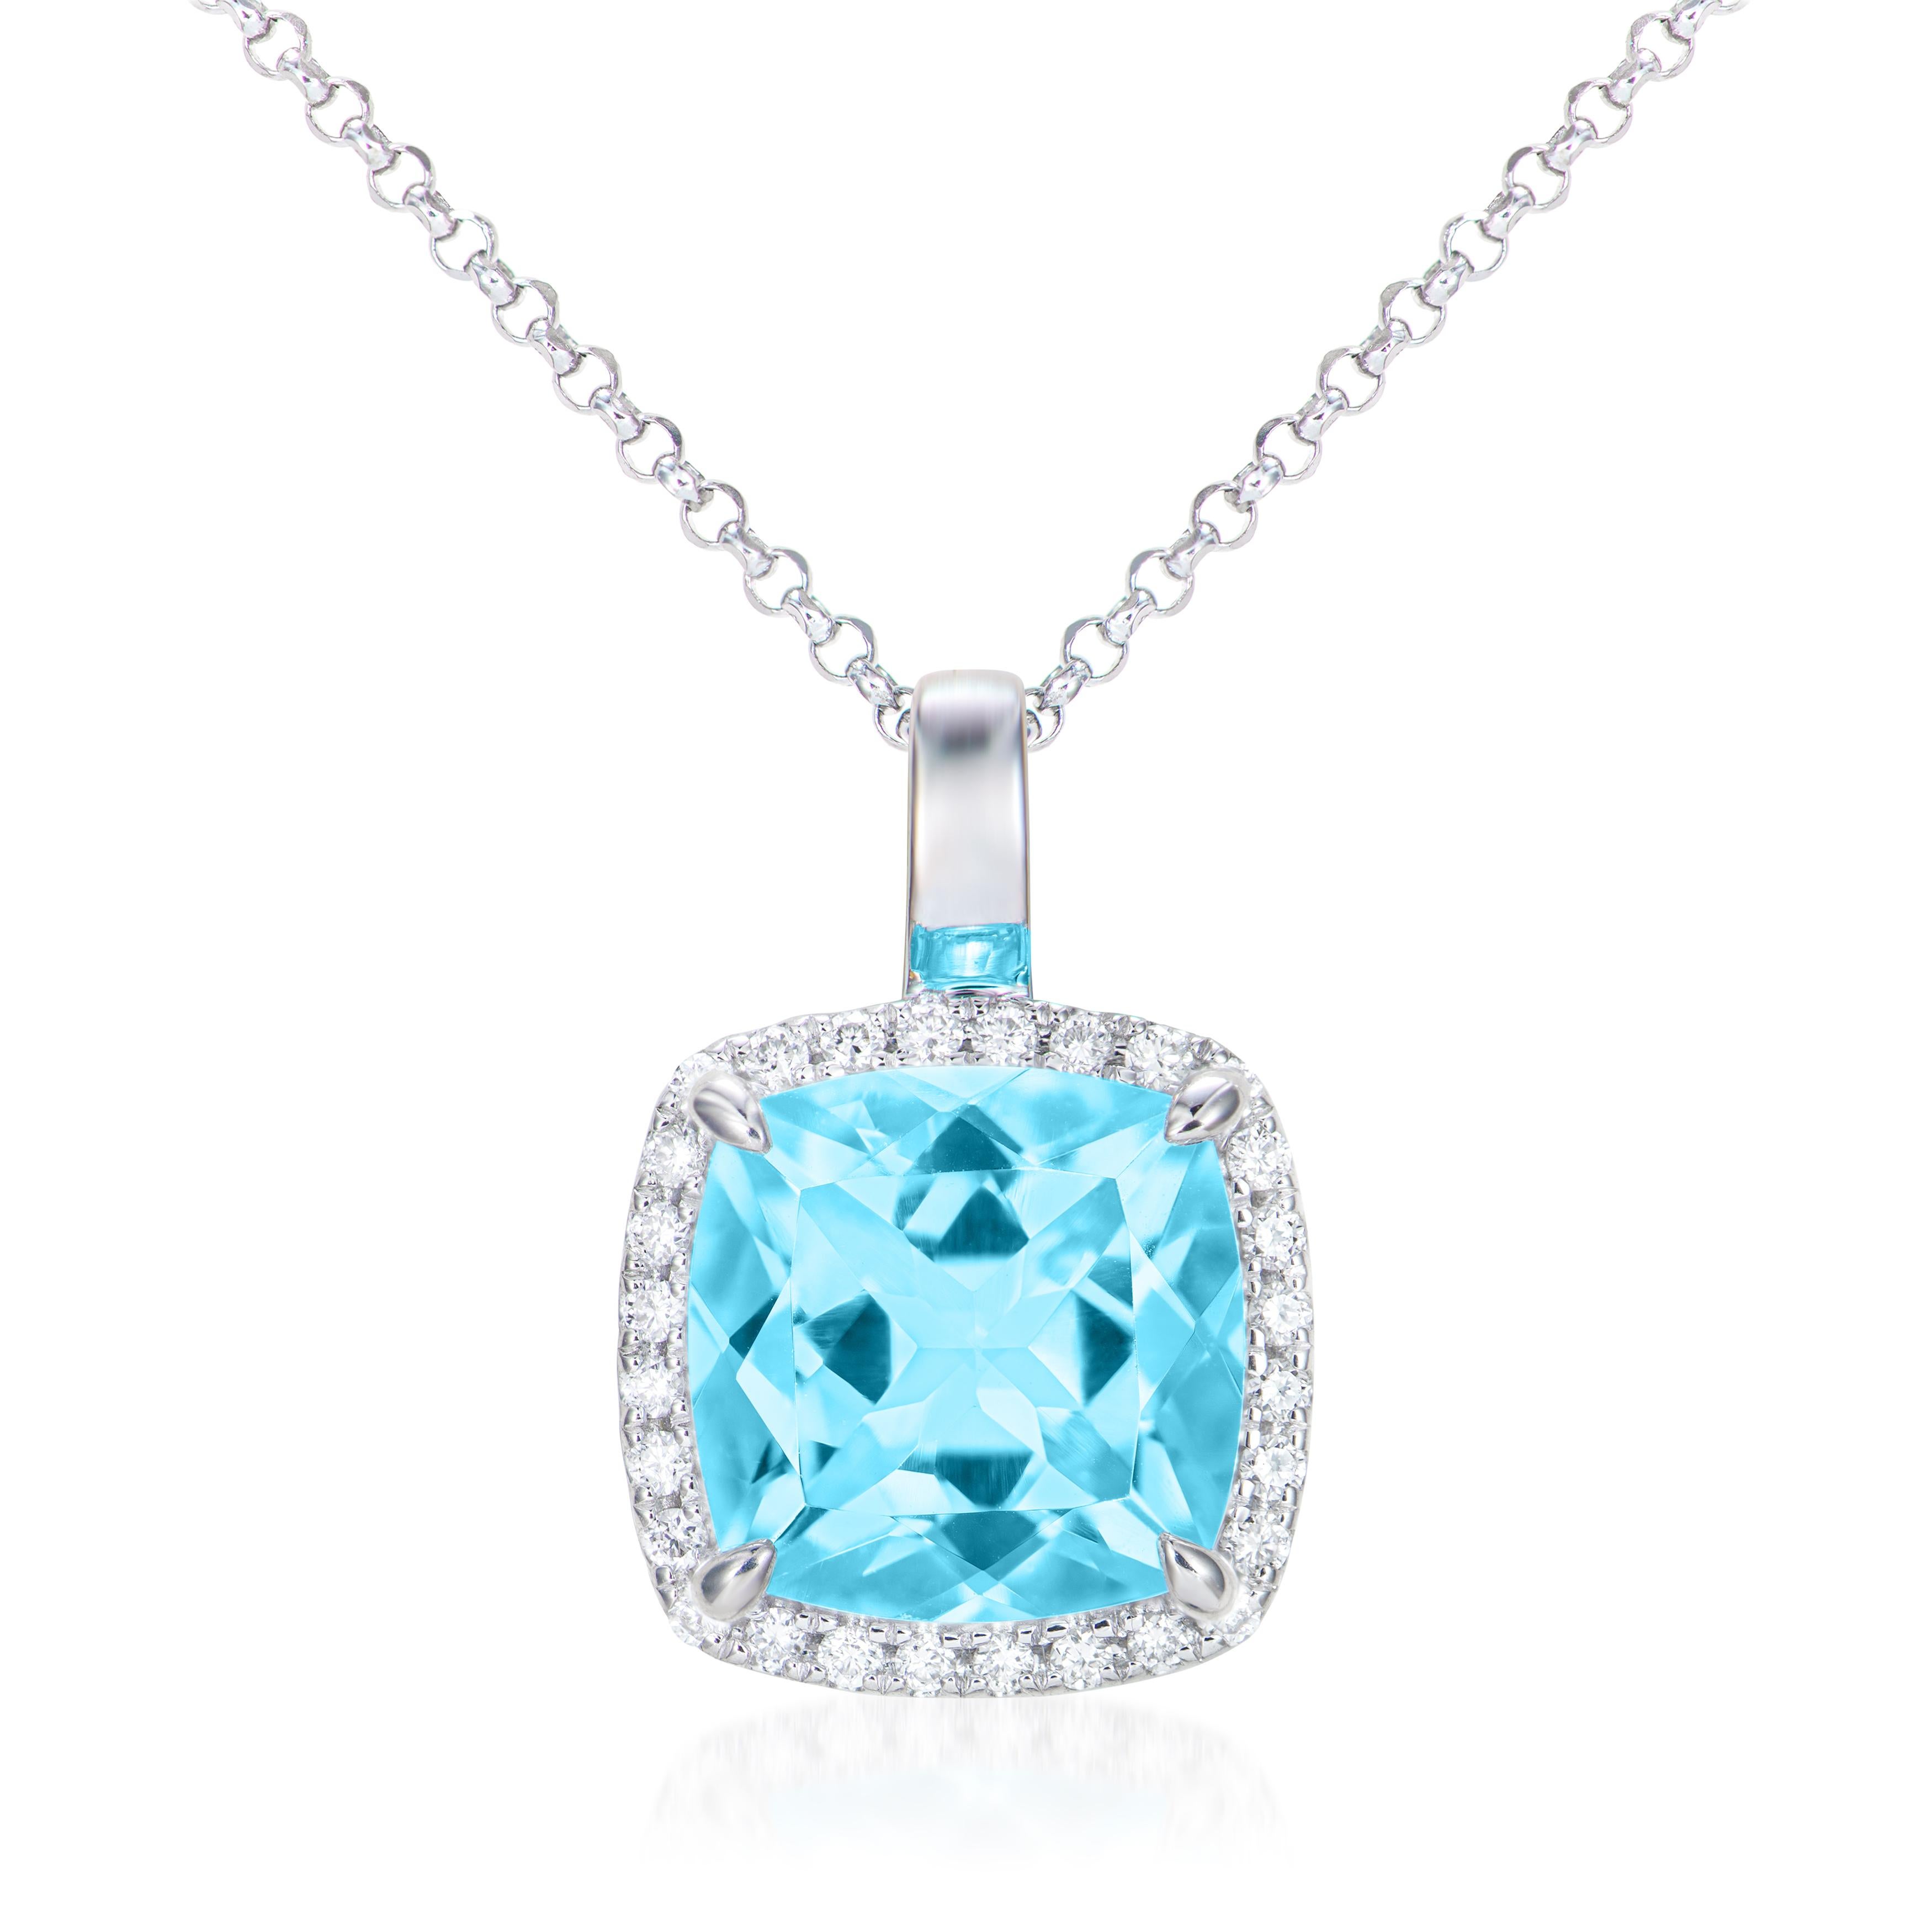 Presented A lovely collection of gems, including Swiss Blue topaz, Amethyst, Peridot, Rhodolite, Sky Blue Topaz, Swiss Blue Topaz and Morganite is perfect for people who value quality and want to wear it to any occasion or celebration. The White